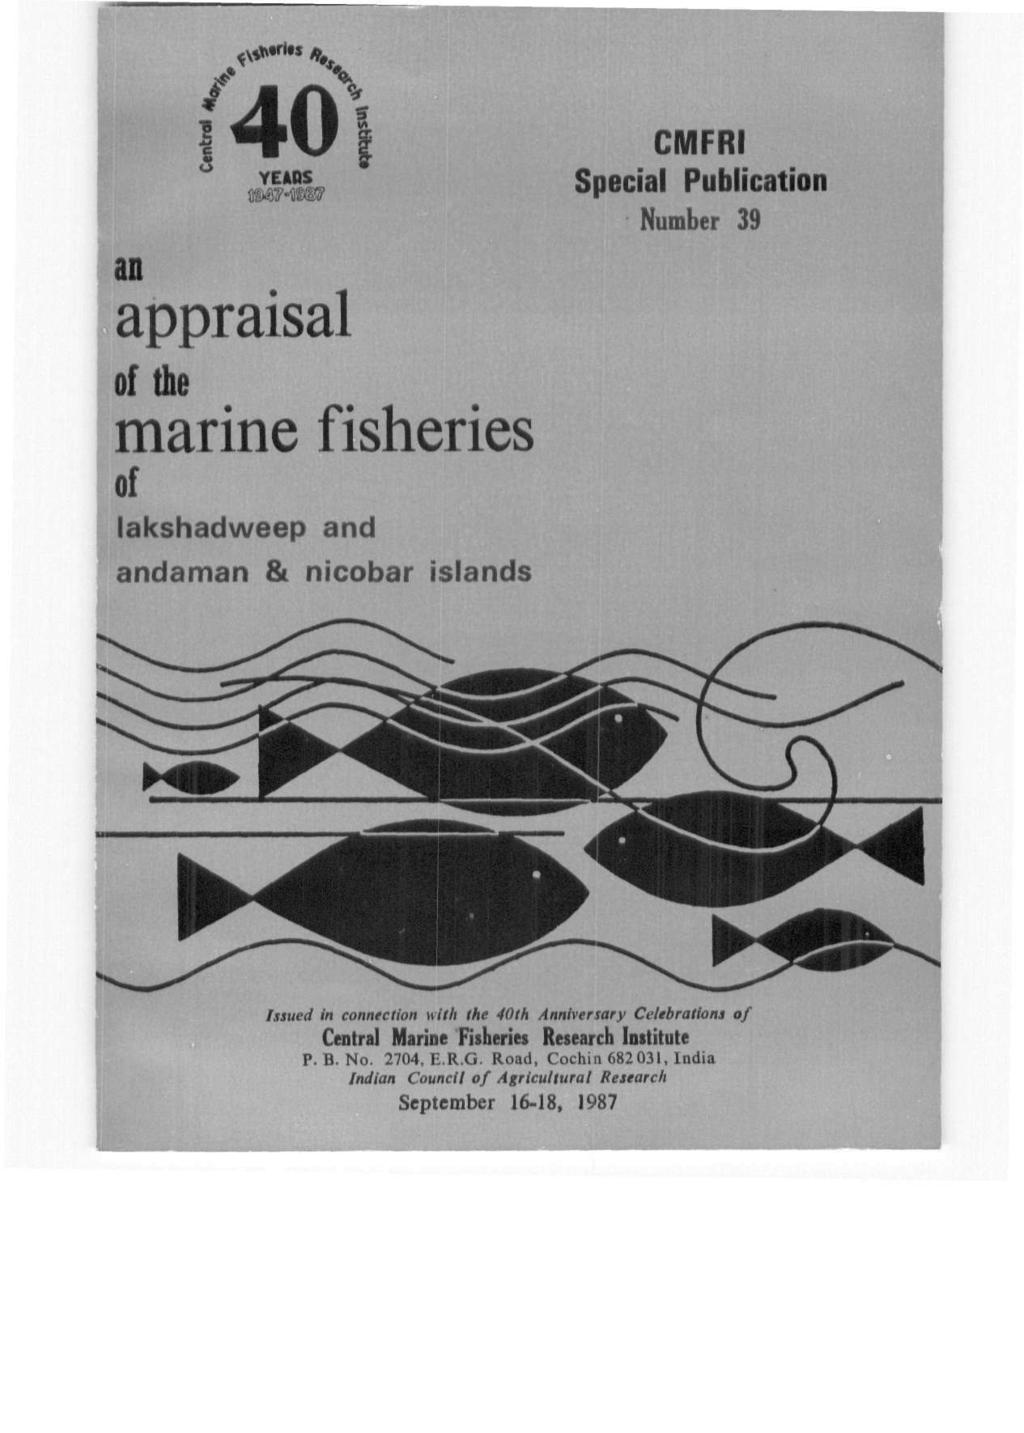 40 4f 1 YEARS an appraisal of the marine fisheries of lakshadweep and CMFRI Special Publication Number 39 andaman & nicobar islands Issued in connection with the 40th